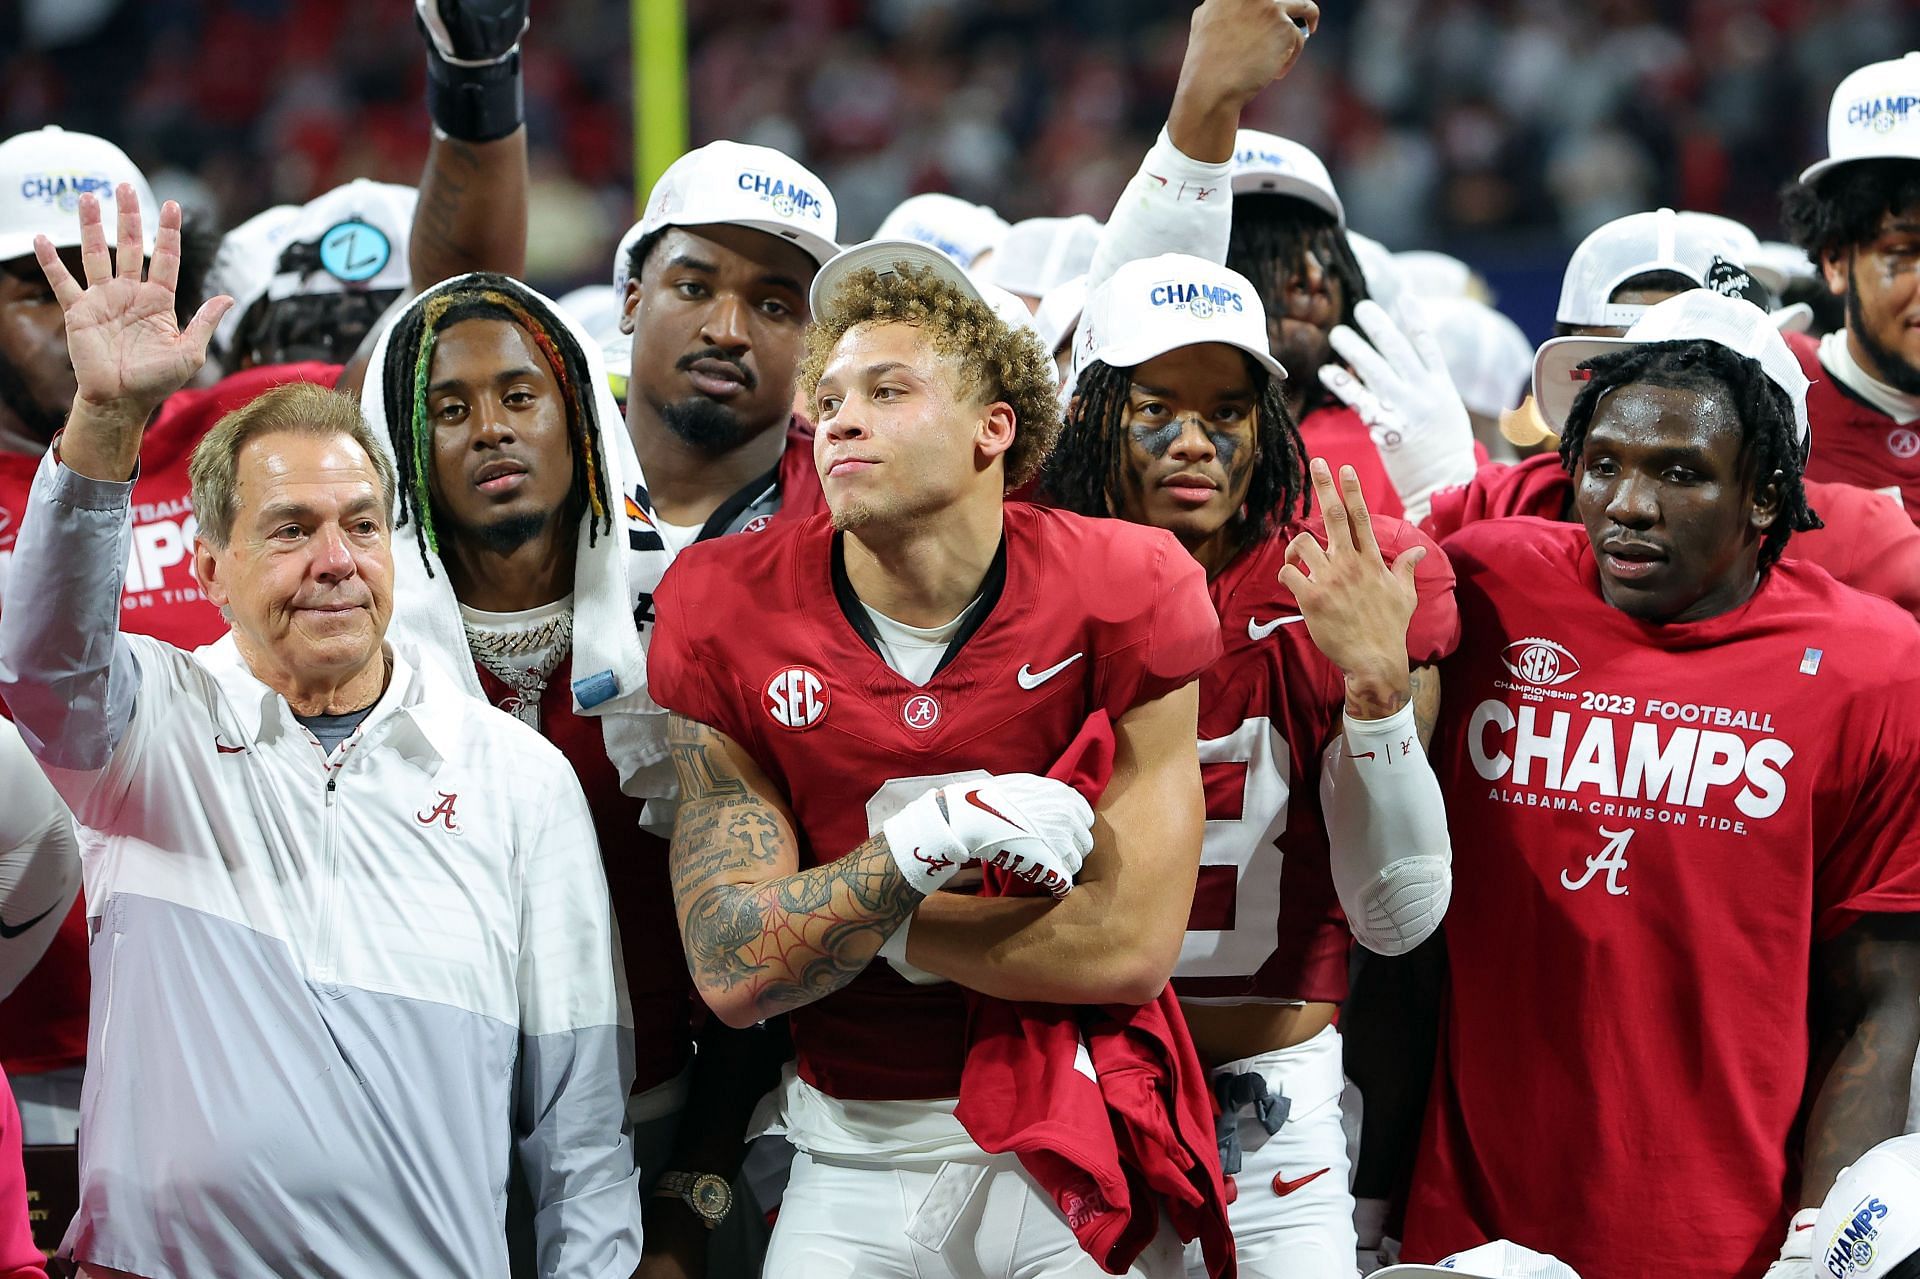 Nike's powerful farewell ad for Nick Saban reflects long-haunted dilemma of  SEC coaches: "College football world hasn't slept this well in years"